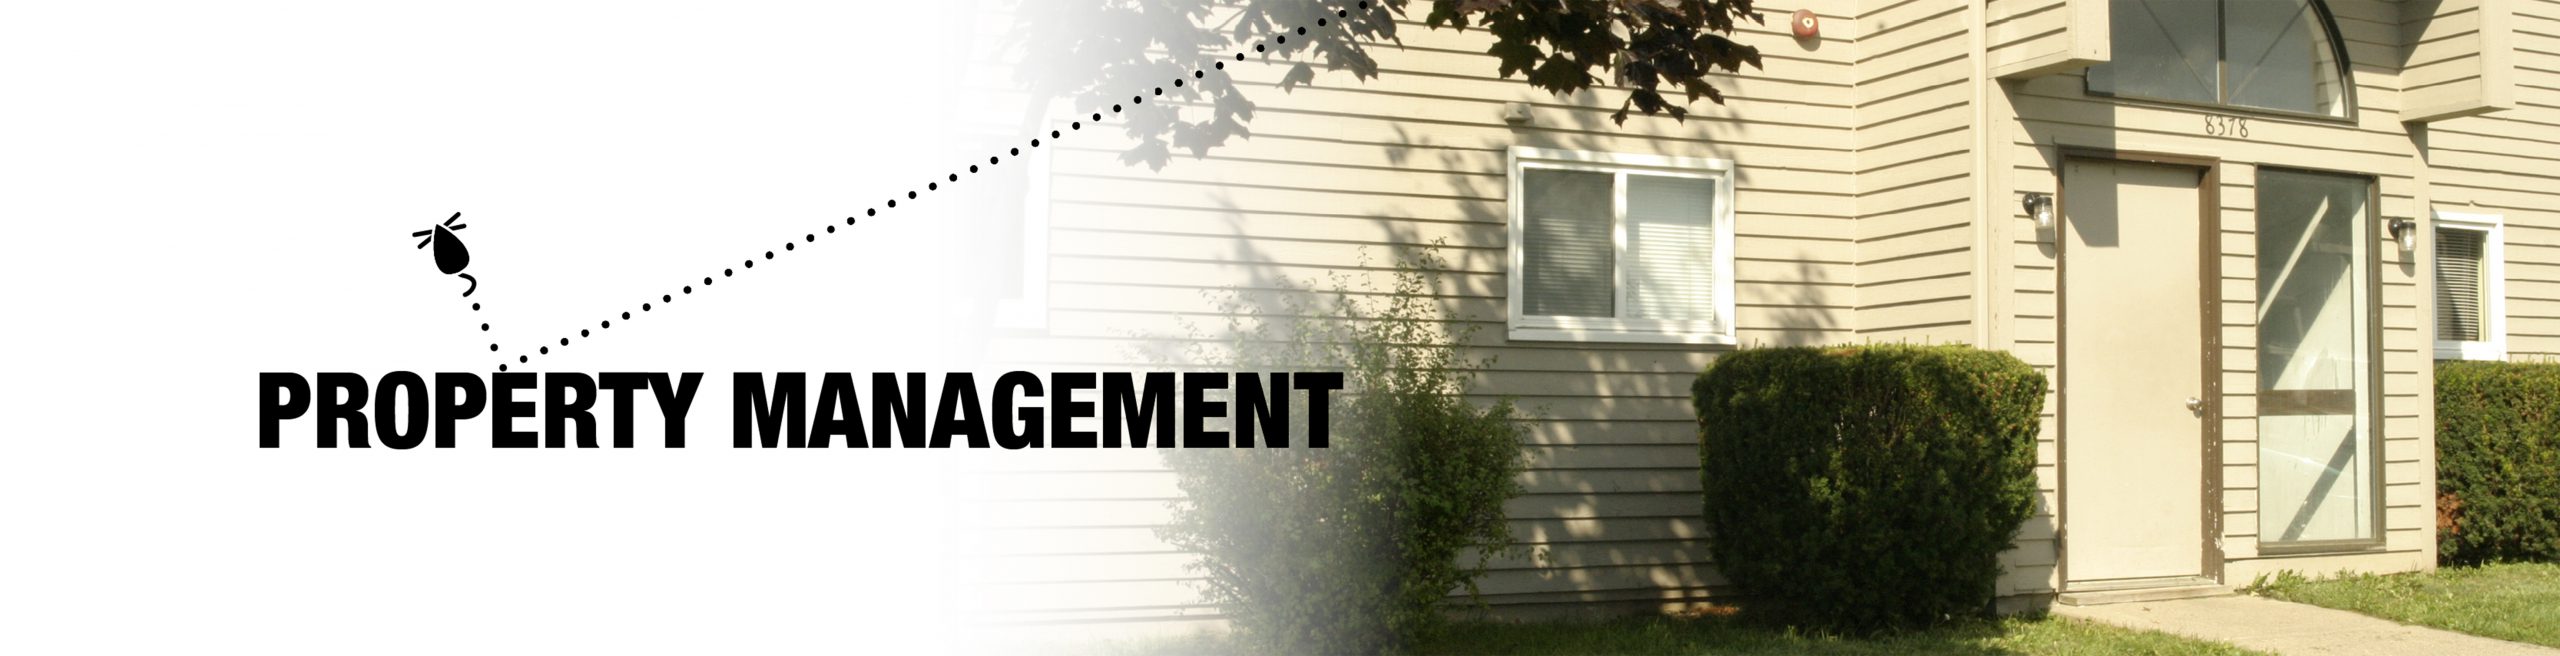 Property Management headers with image of apartment building